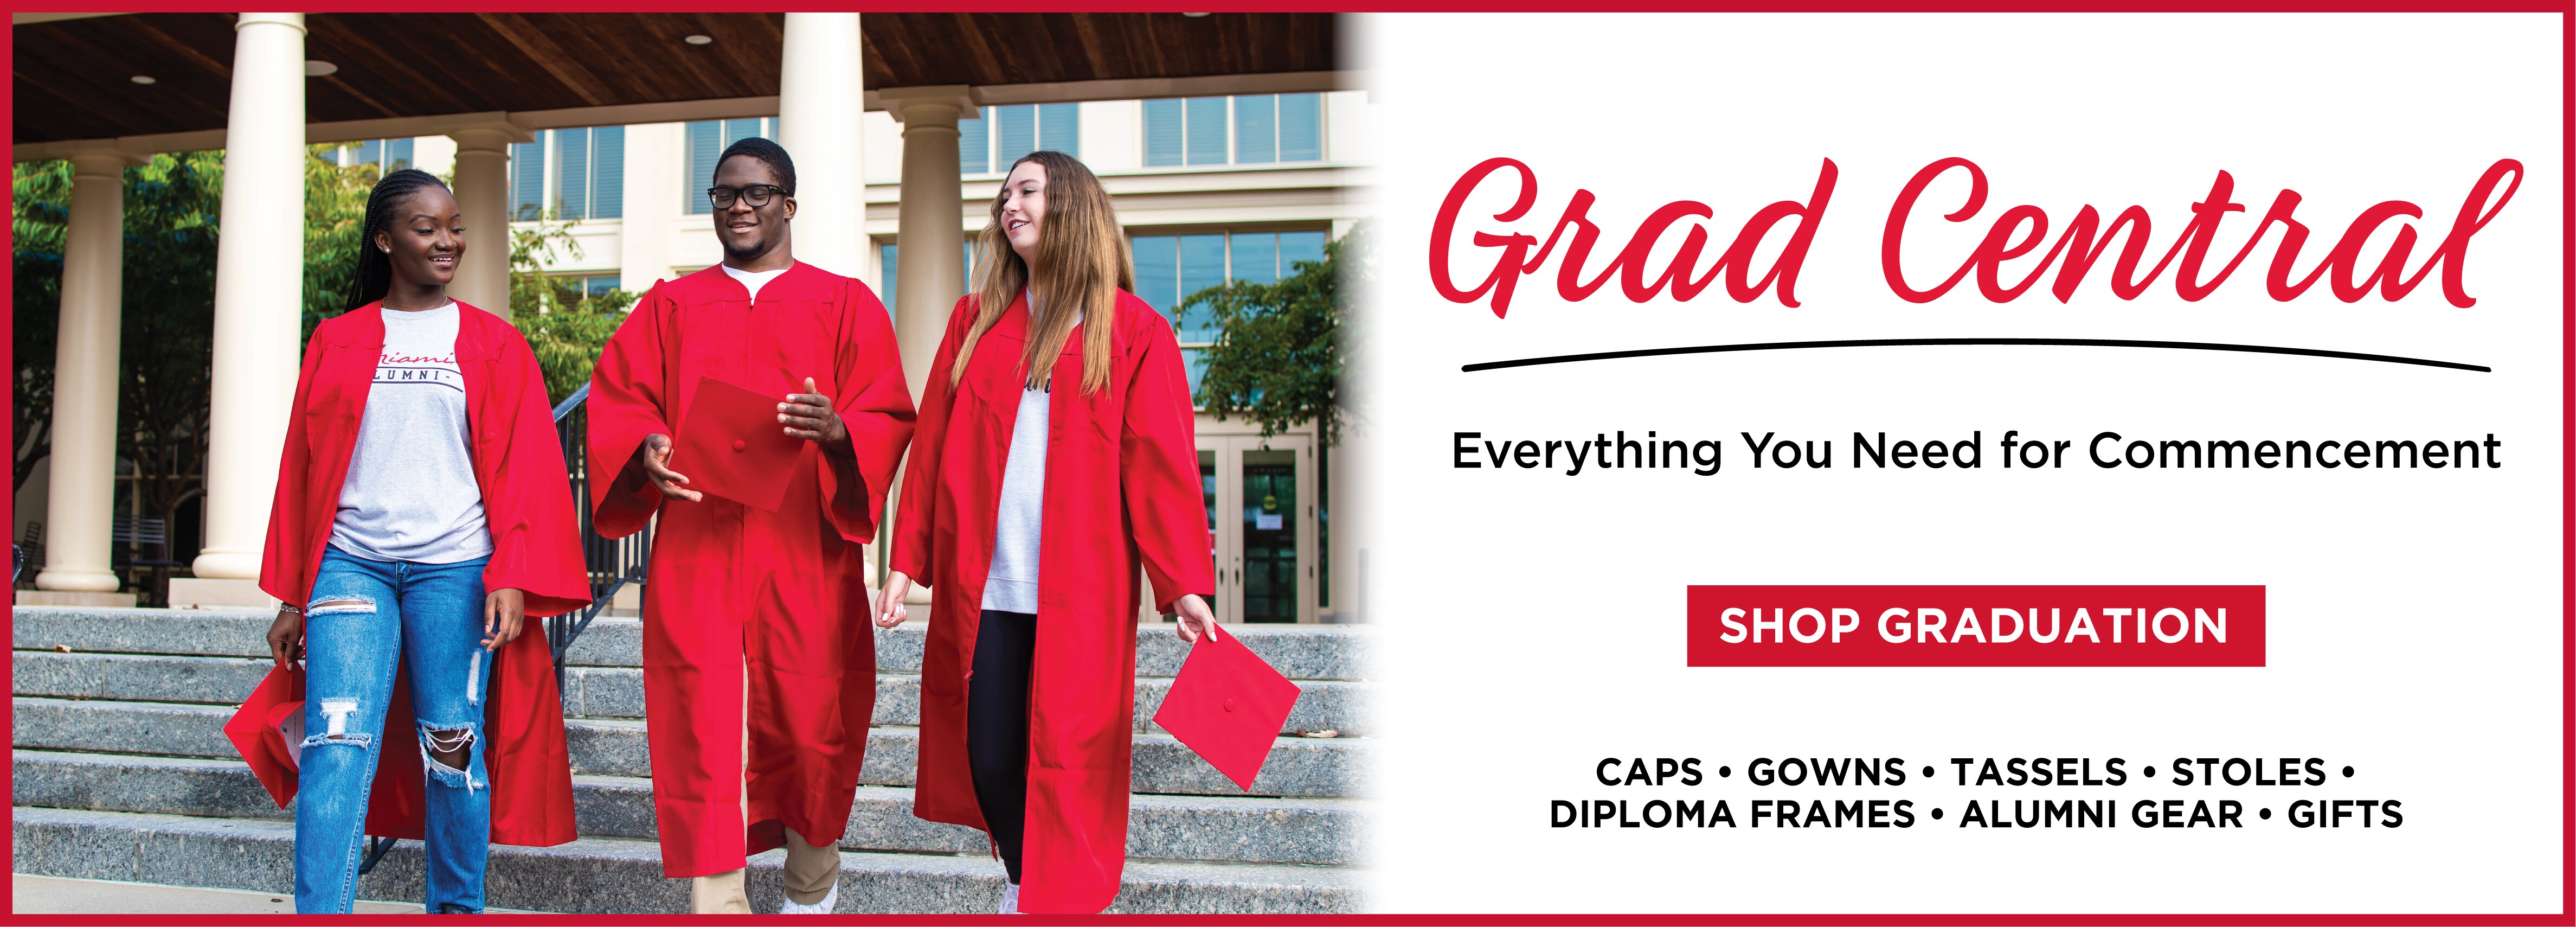 Grad Central. Everything you need for commencement. Shop Graduation. Caps, gowns, tassels, stoles, diploma frames, alumni gear, gifts.